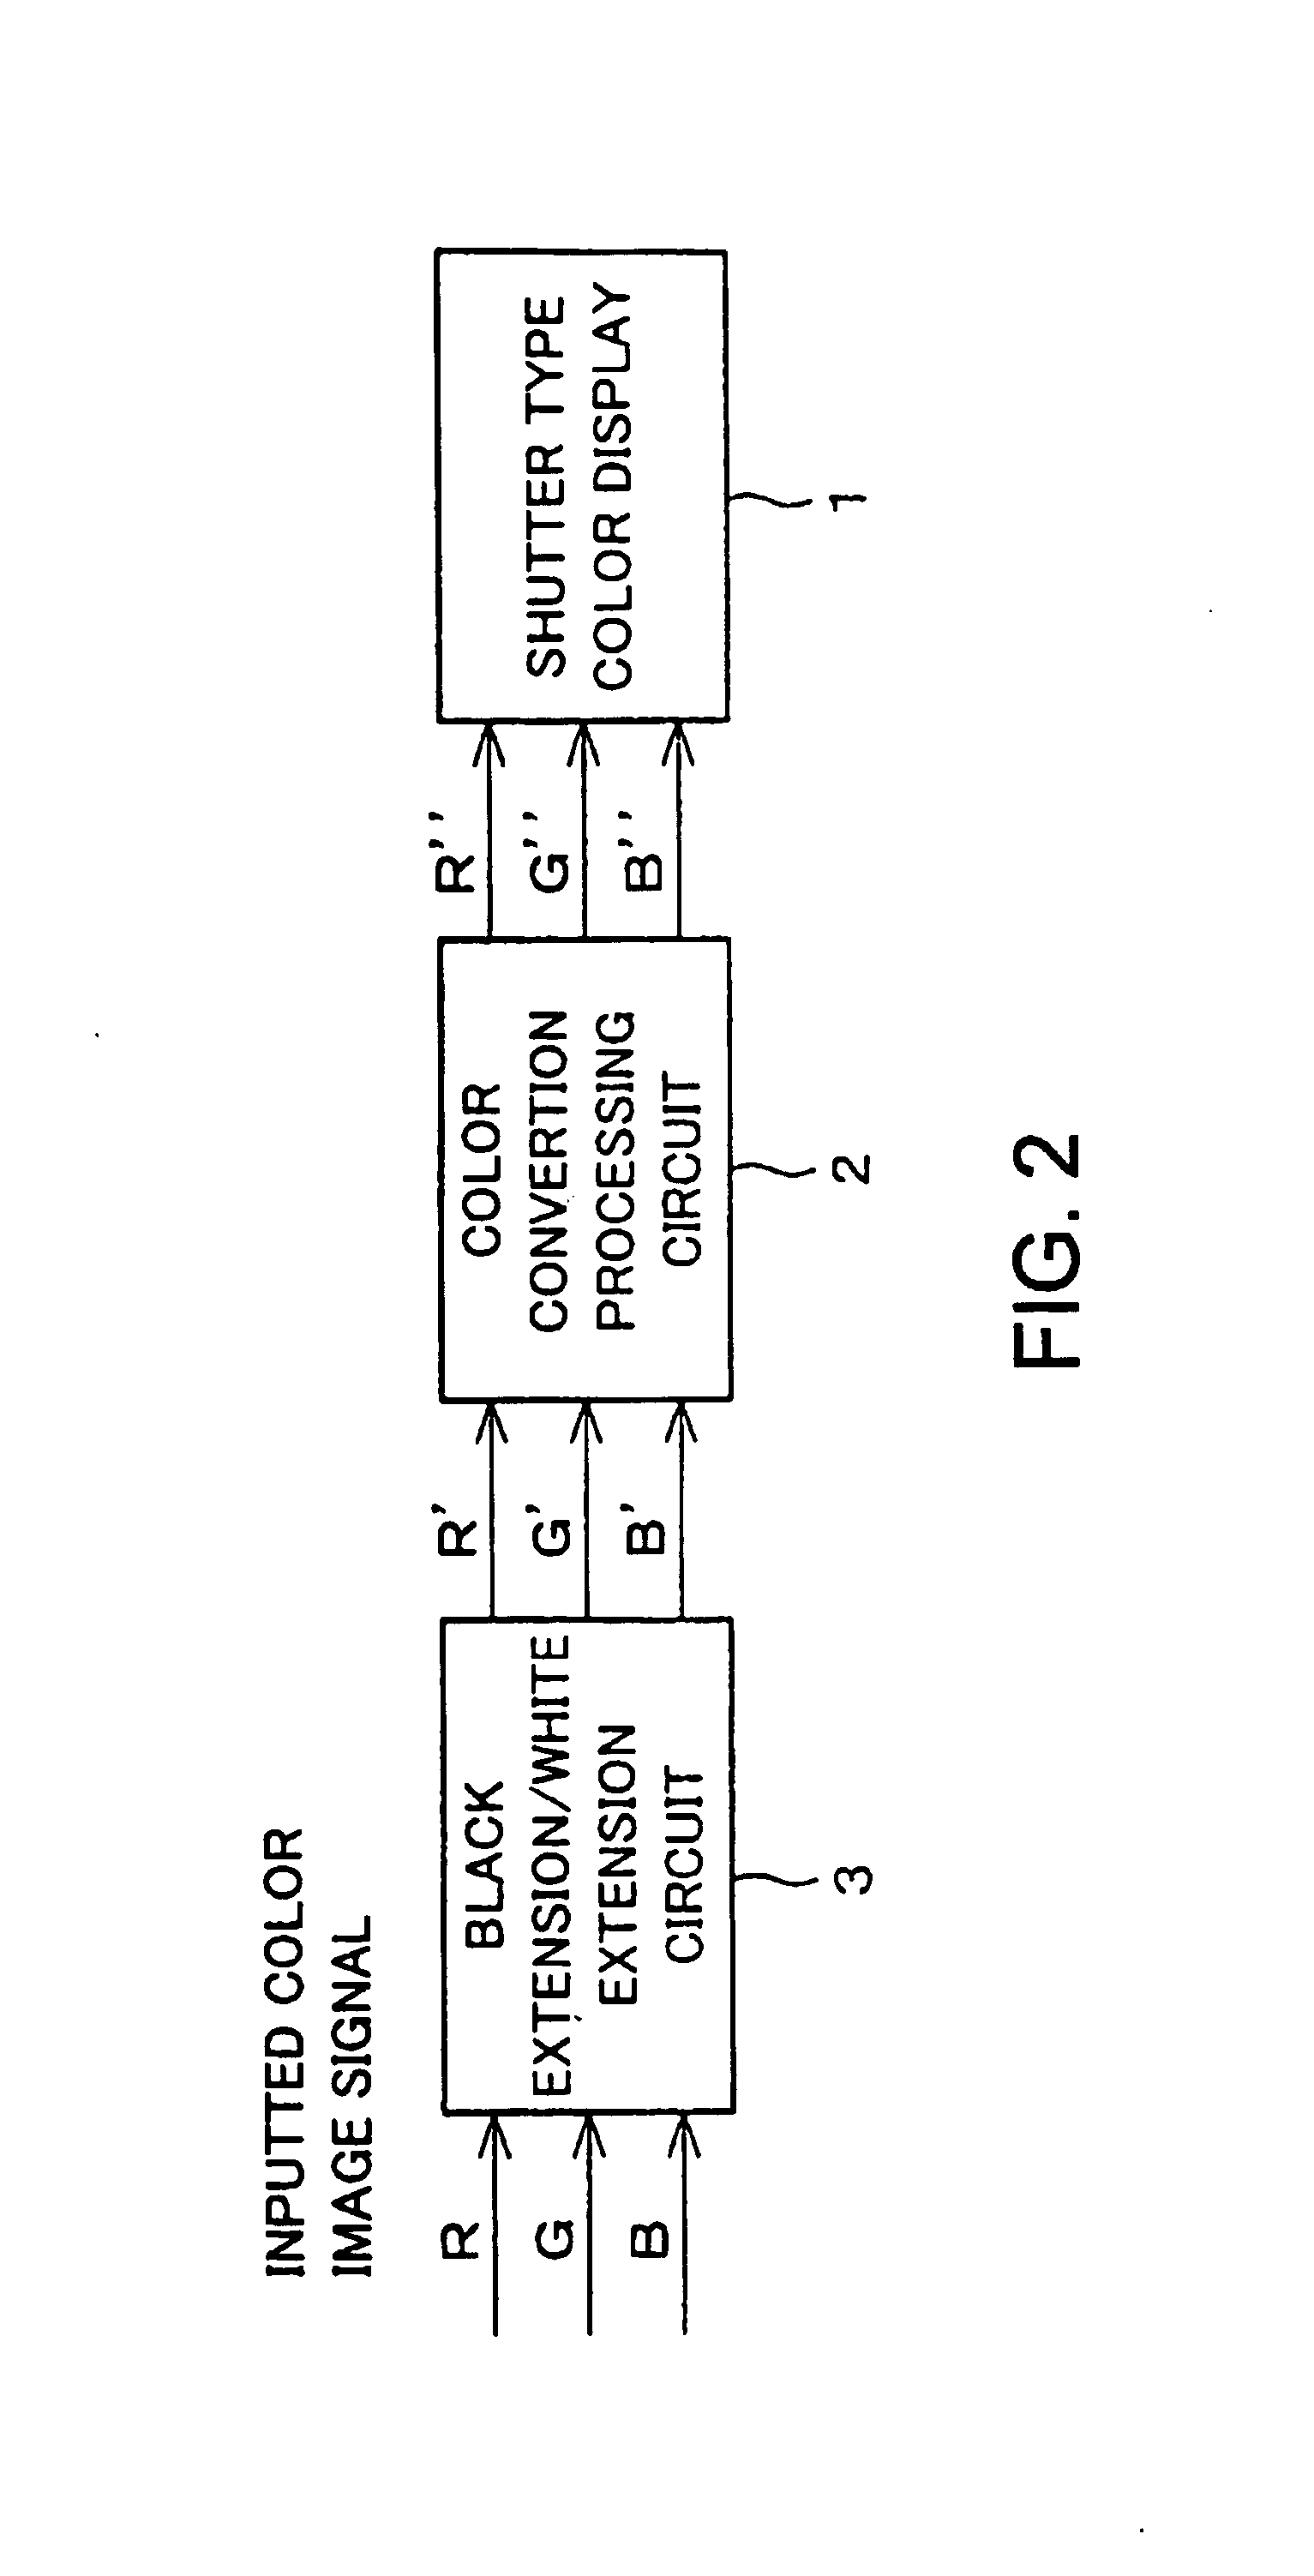 Color display device